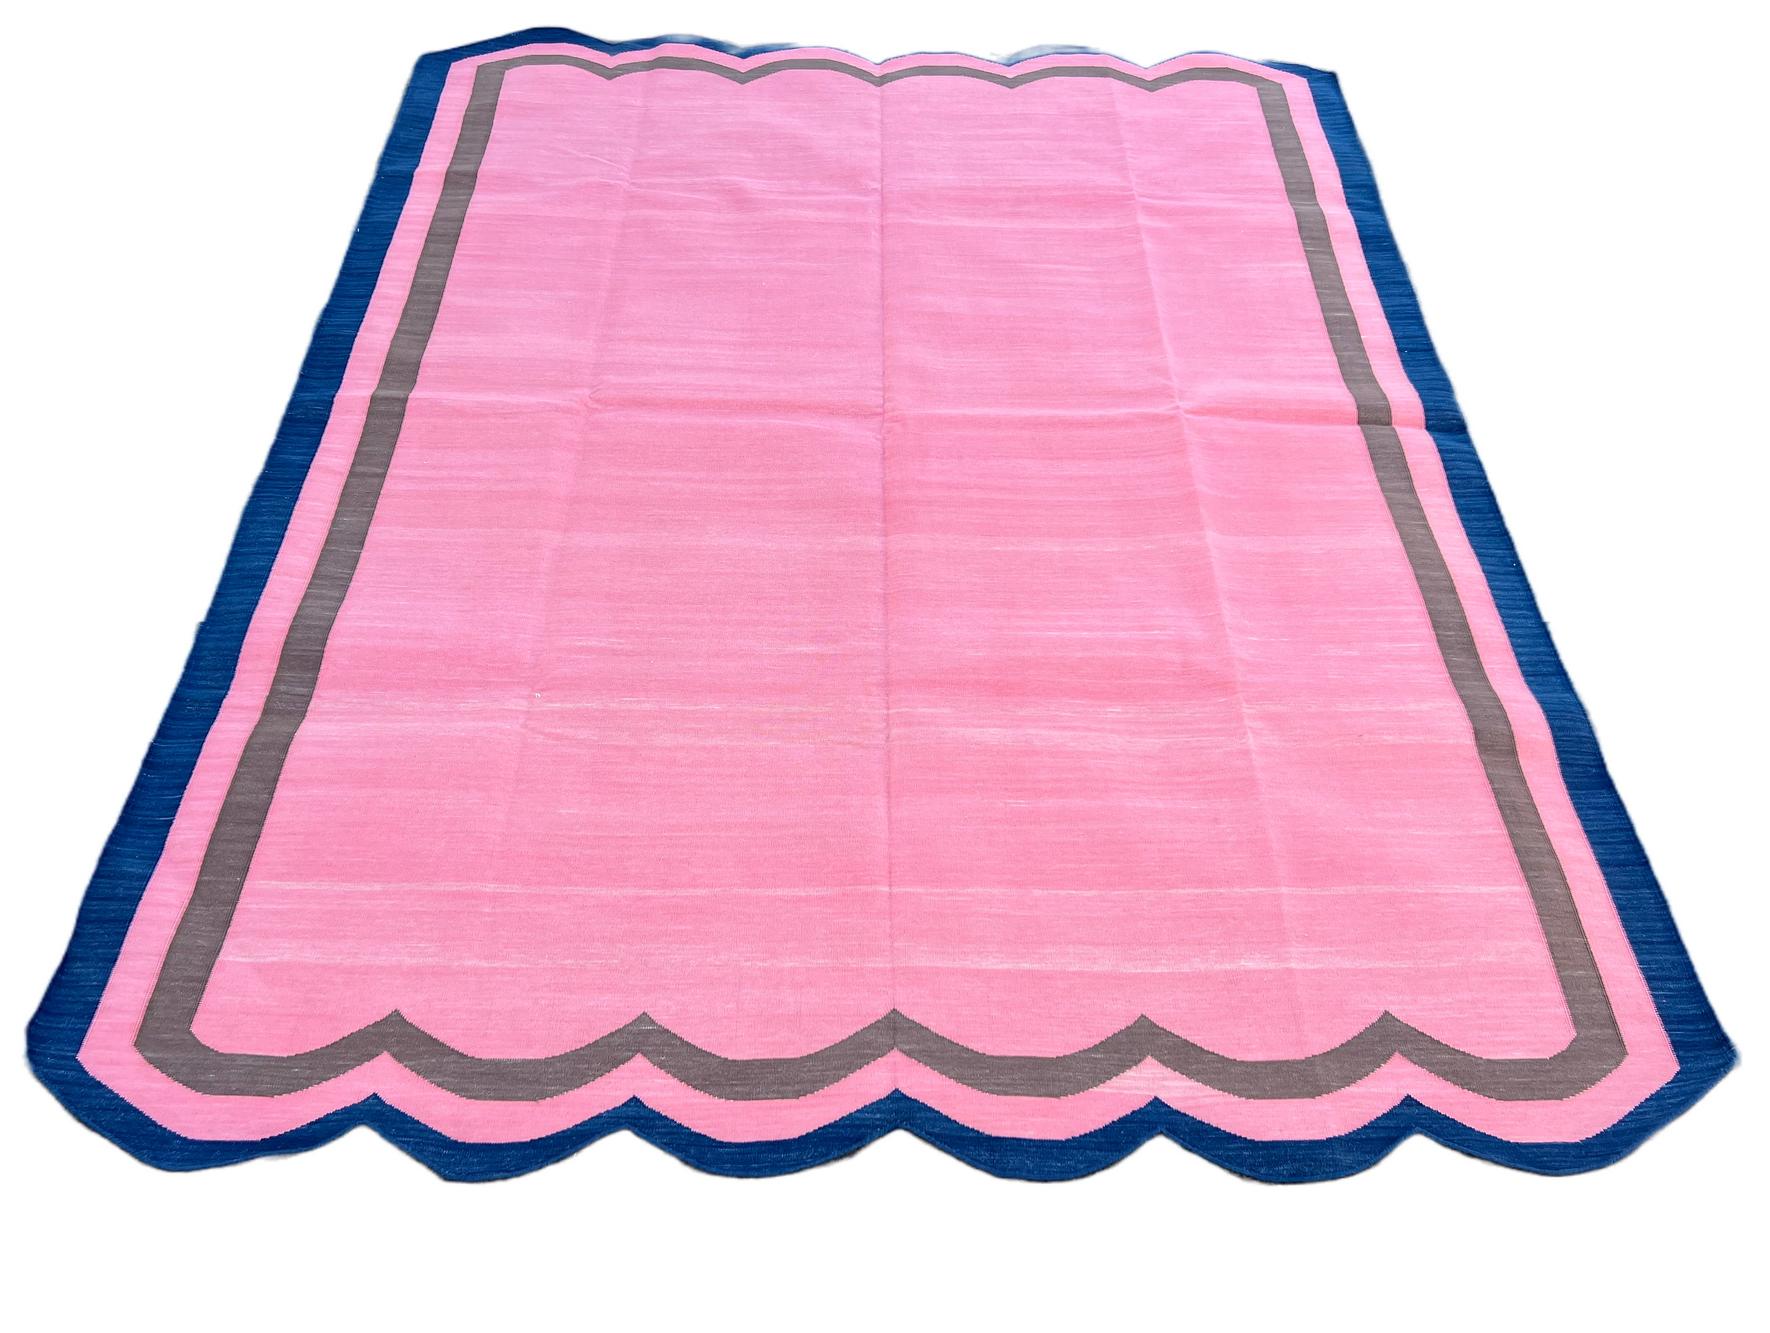 Handmade Cotton Area Flat Weave Rug, 6x8 Pink And Blue Scalloped Striped Dhurrie For Sale 3